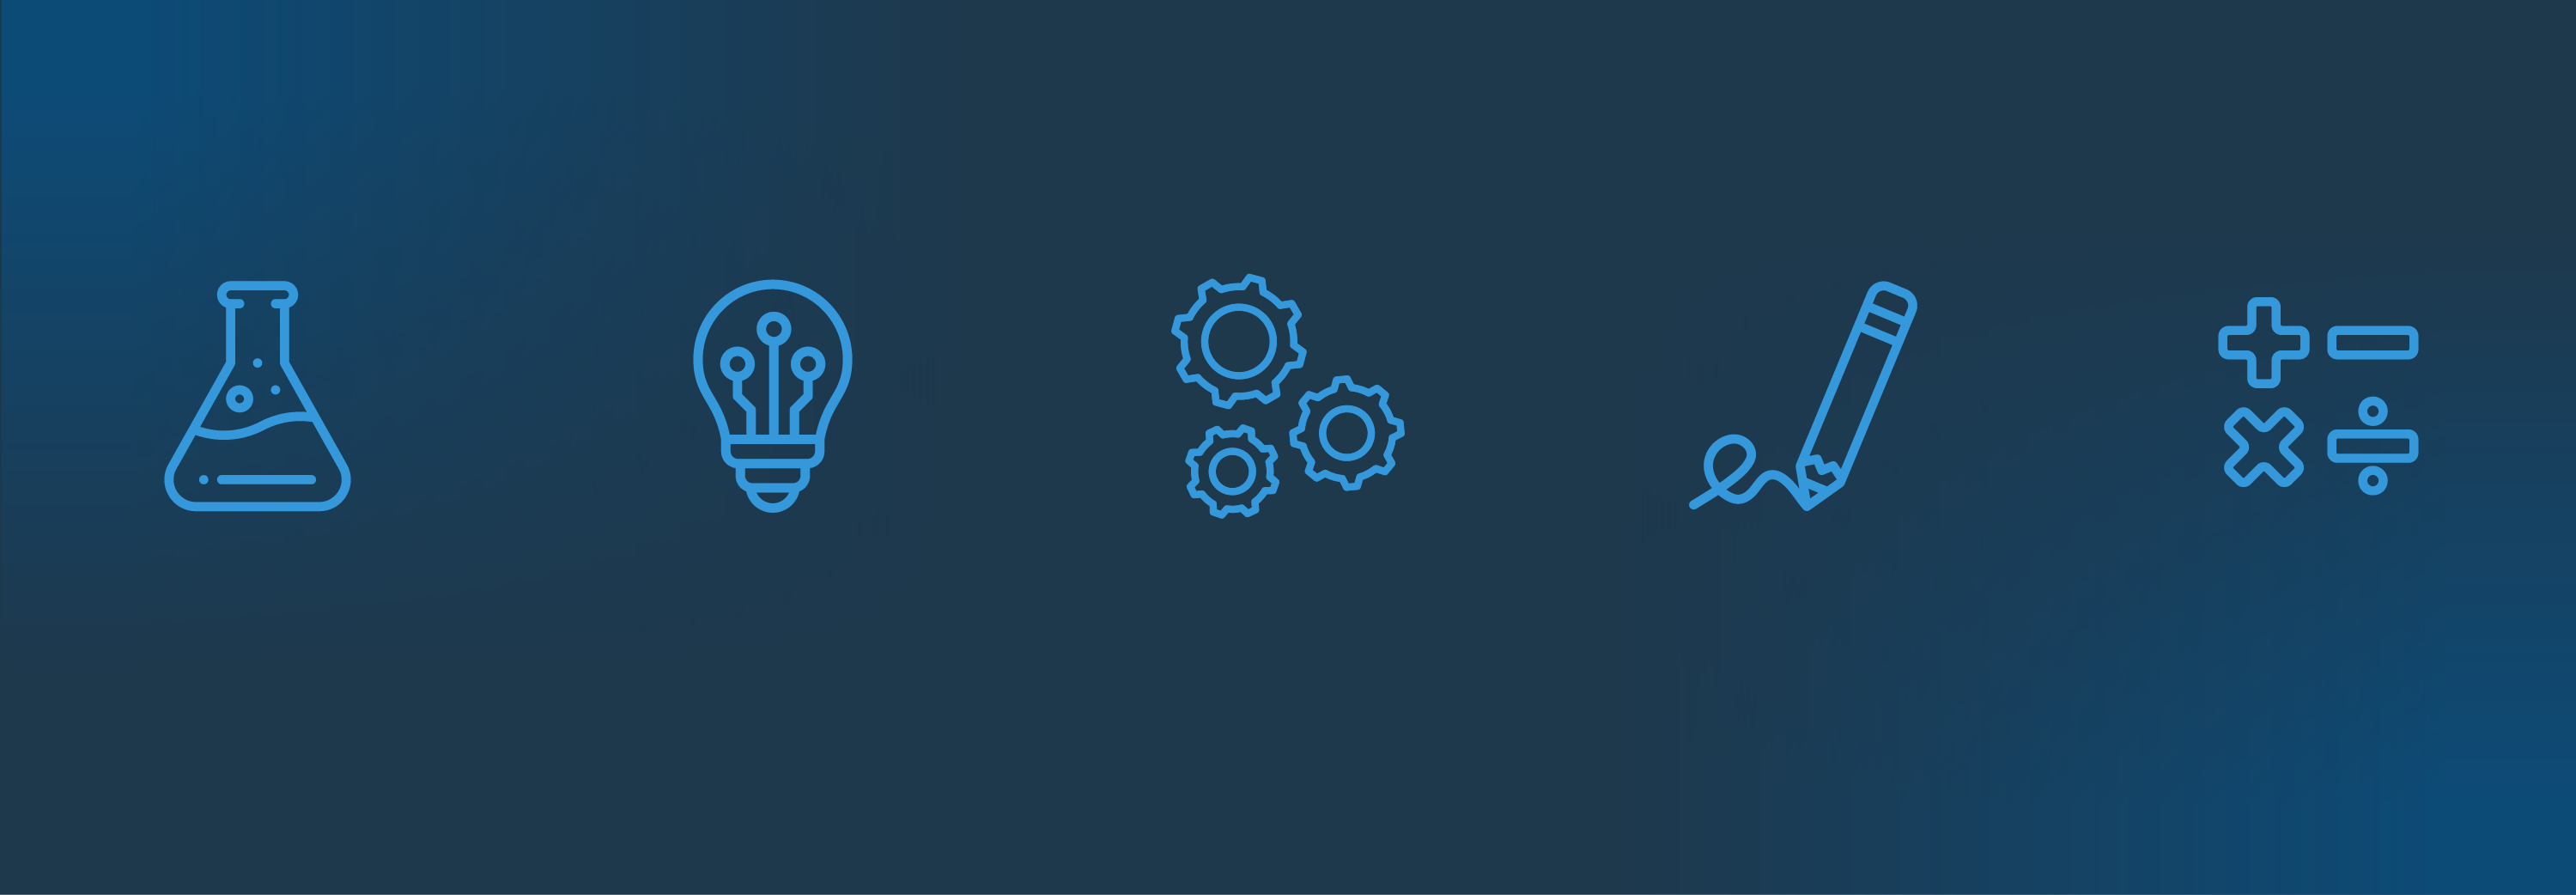 STEAM Academy icons